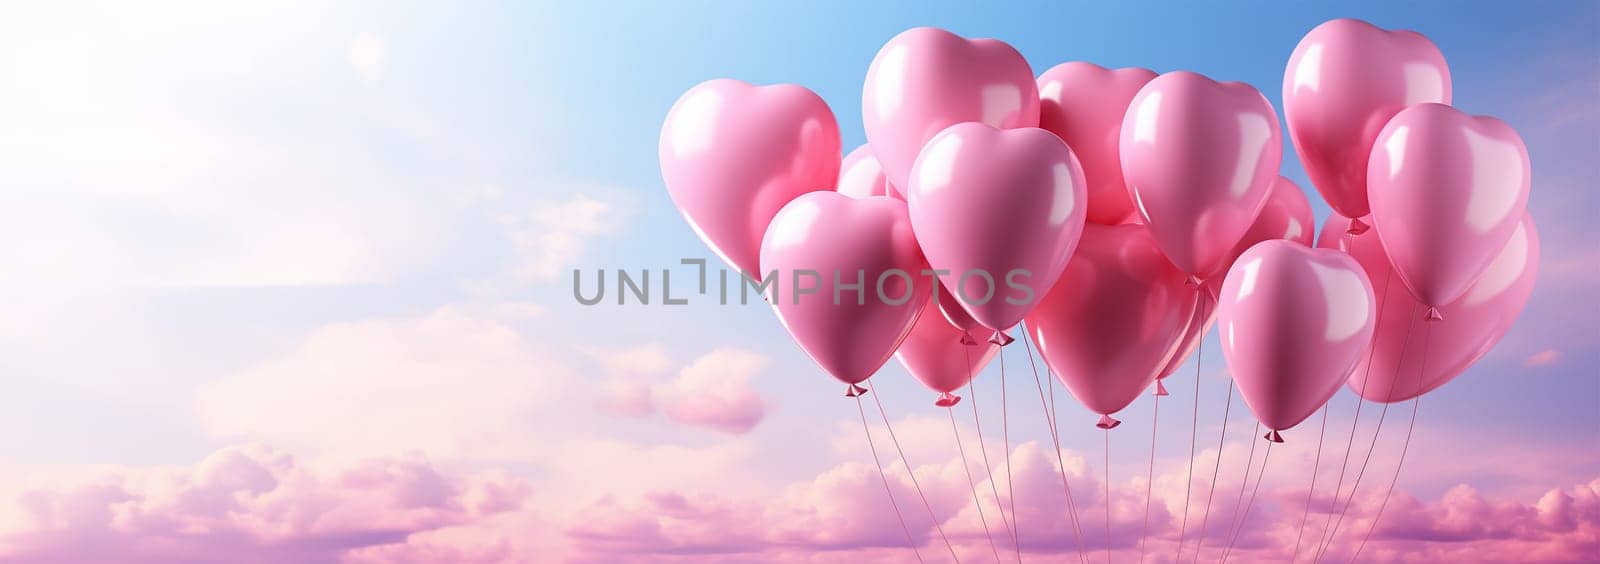 Pink balloons heart shape against colorful blue sunset sky and pink pastel sky in a sunny bright morning. Romantic postcard background on Valentine's Day. Travel and recreation theme Copy space by Annebel146